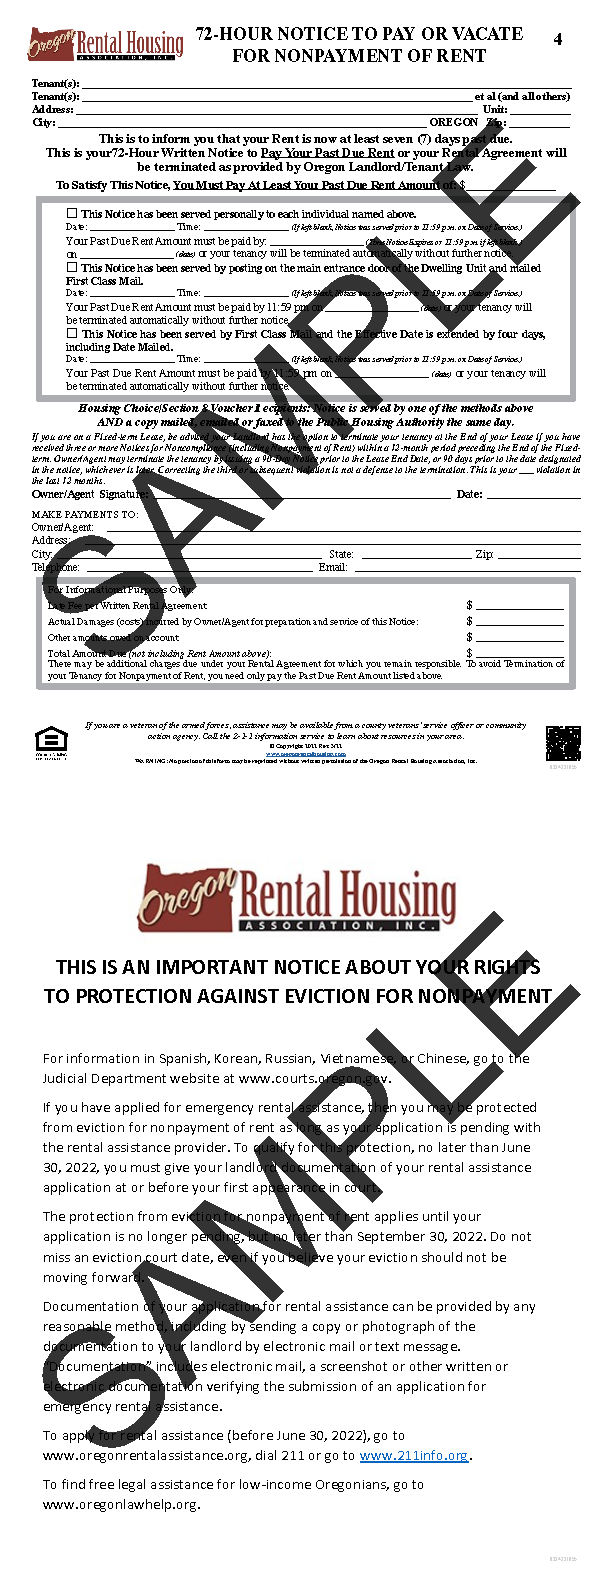 Remove Name From Lease Letter Sample from store.oregonrentalhousing.com